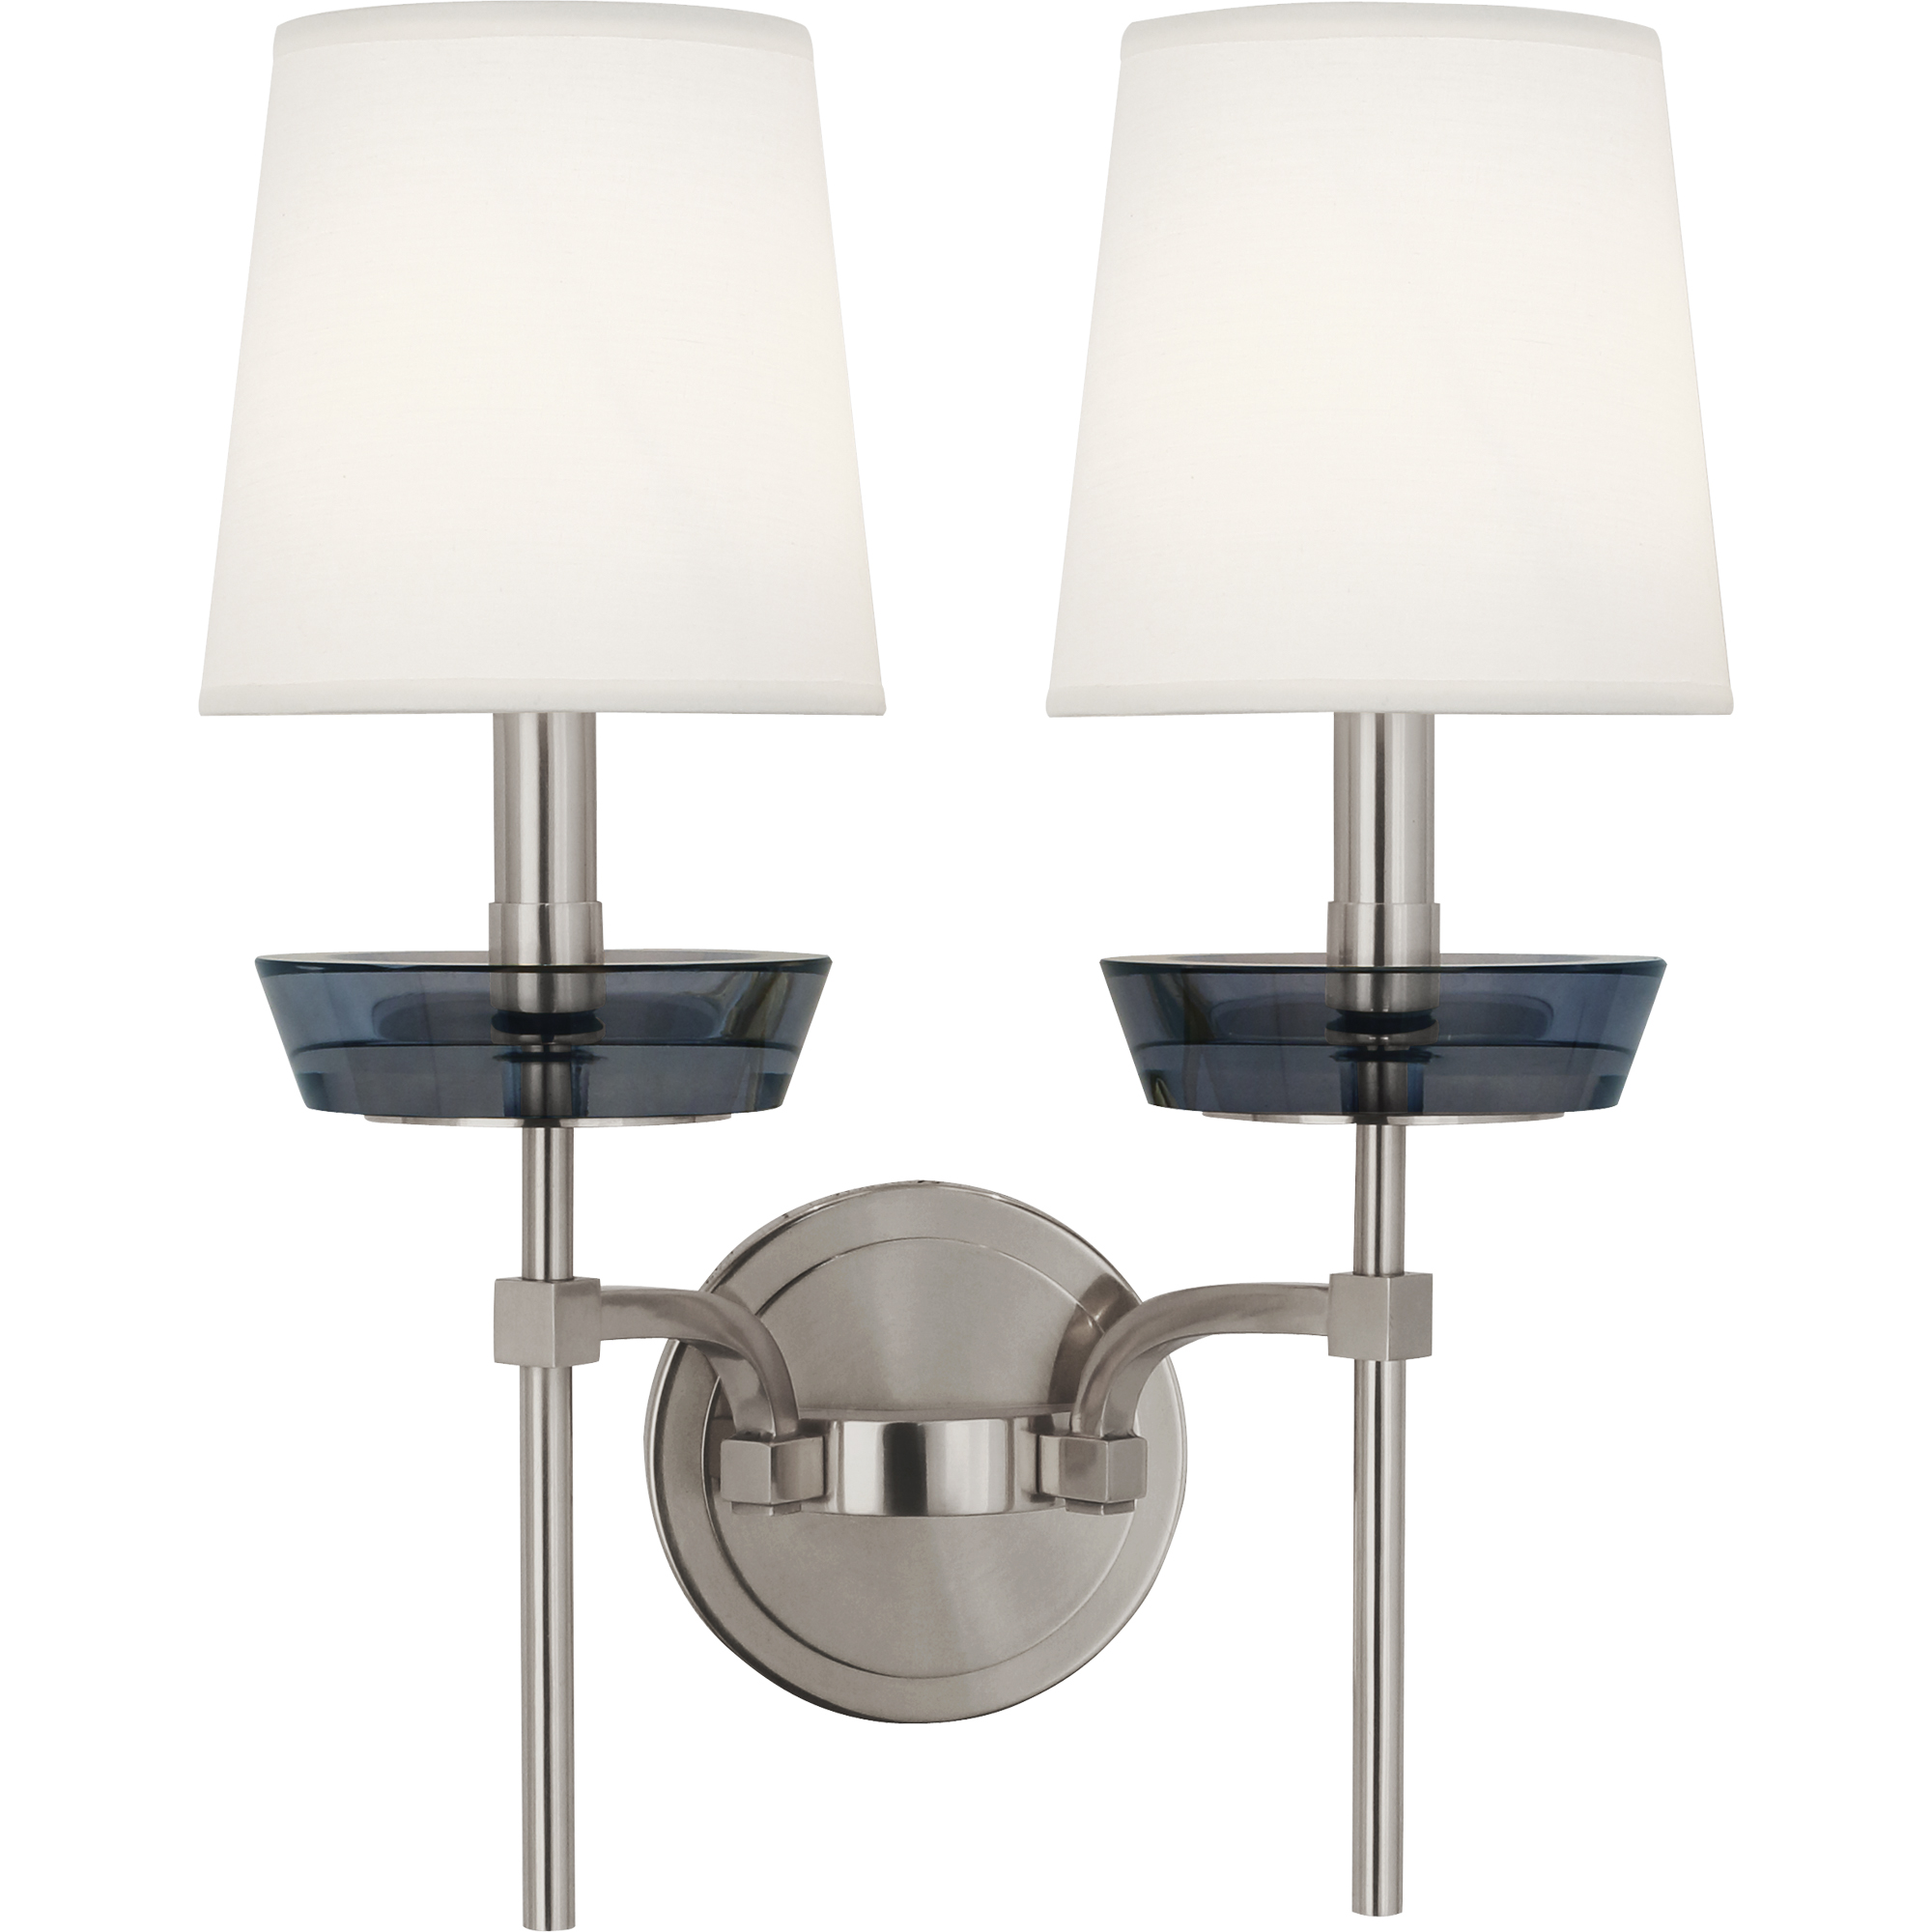 Cristallo Wall Sconce Style #S609